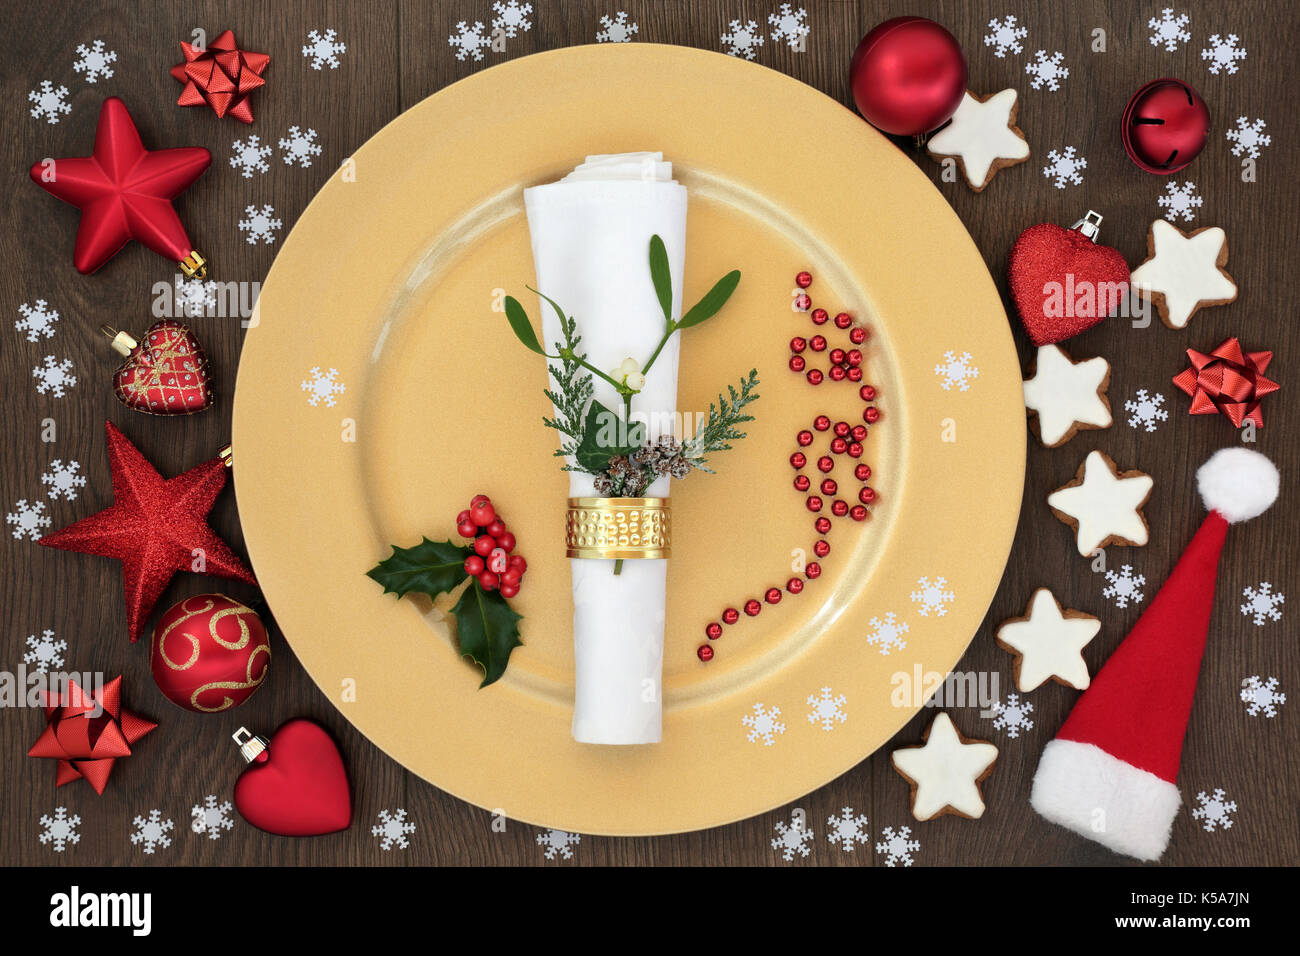 Christmas table place setting with gold dinner plate, napkin with cedar, mistletoe and holly, santa hat, gingerbread biscuits and bauble decorations o Stock Photo